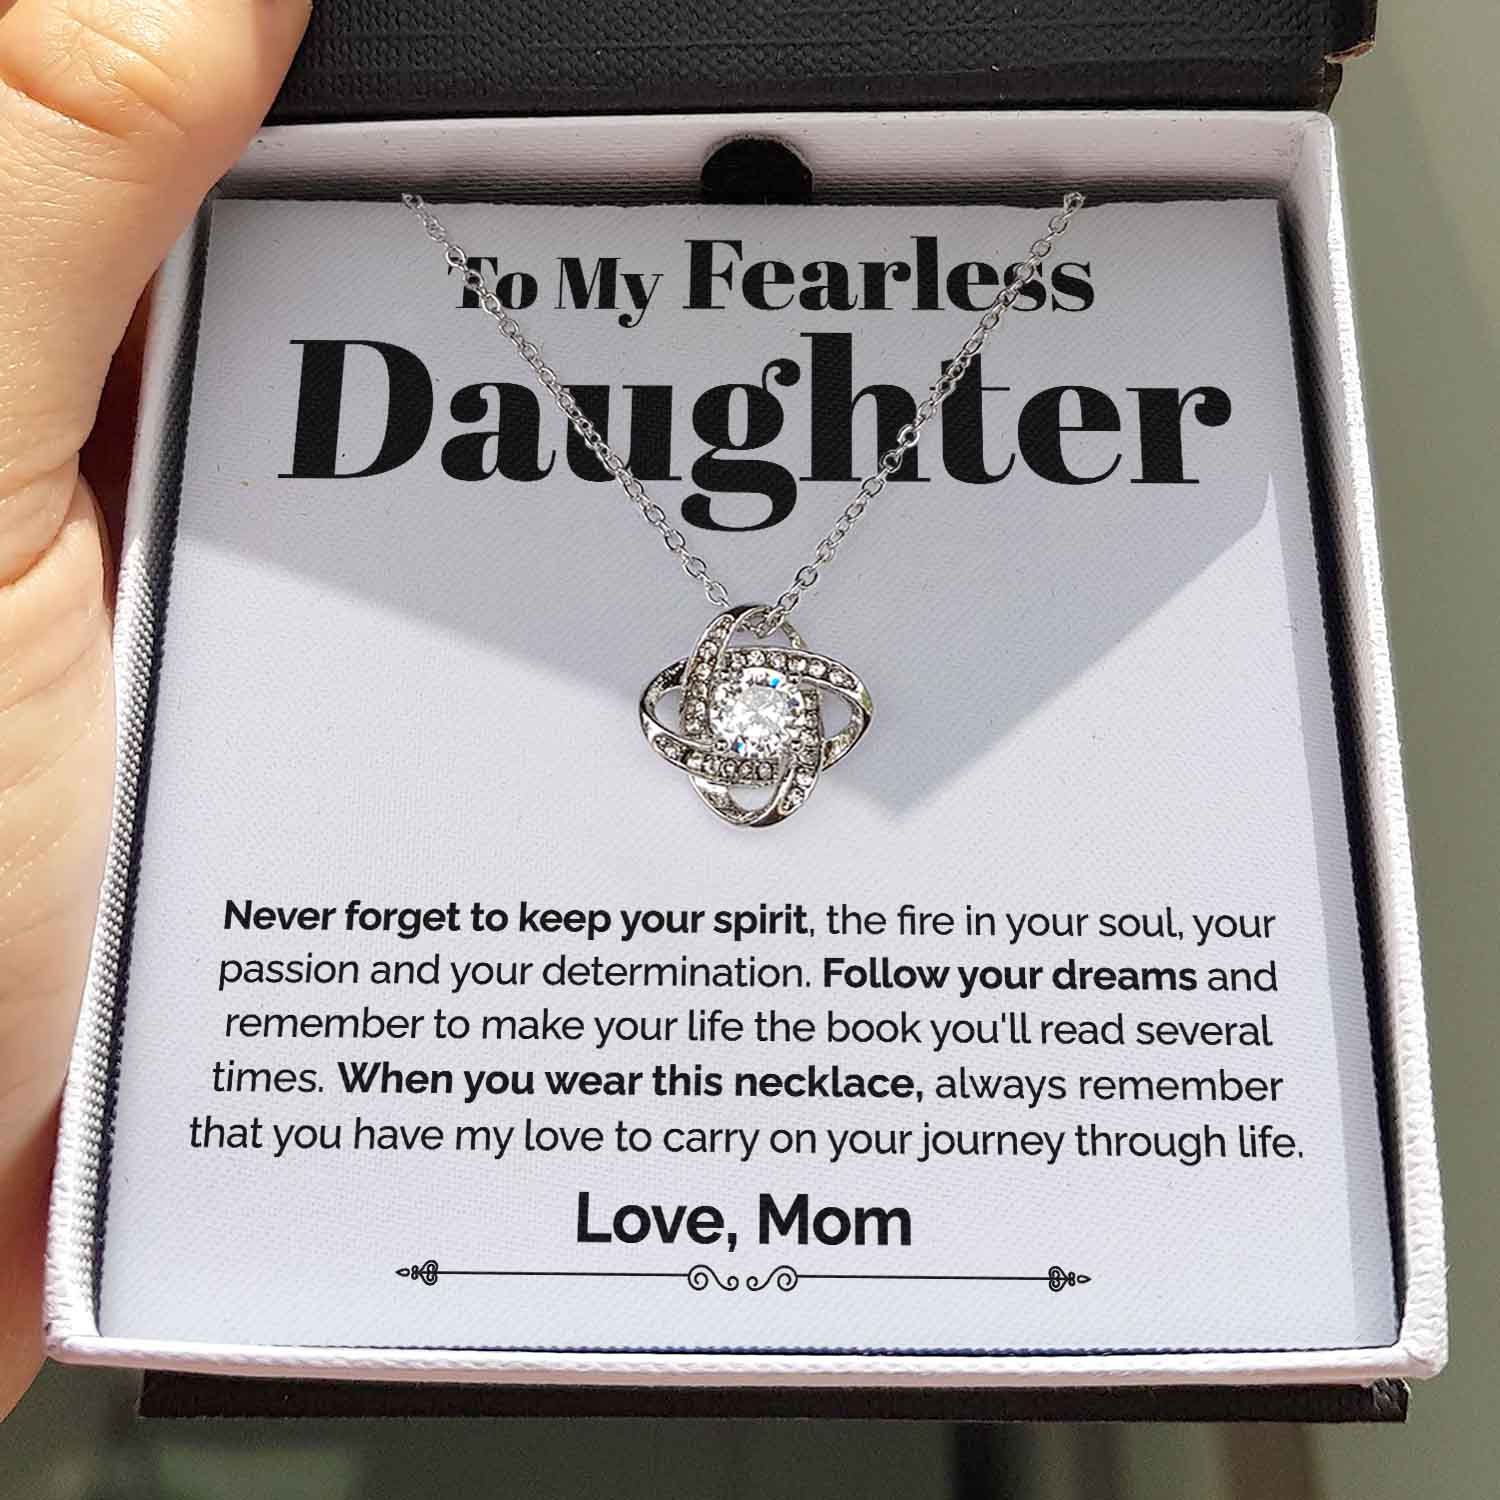 ShineOn Fulfillment Jewelry Standard Box To My Fearless Daughter - Never forget - Love Knot Necklace